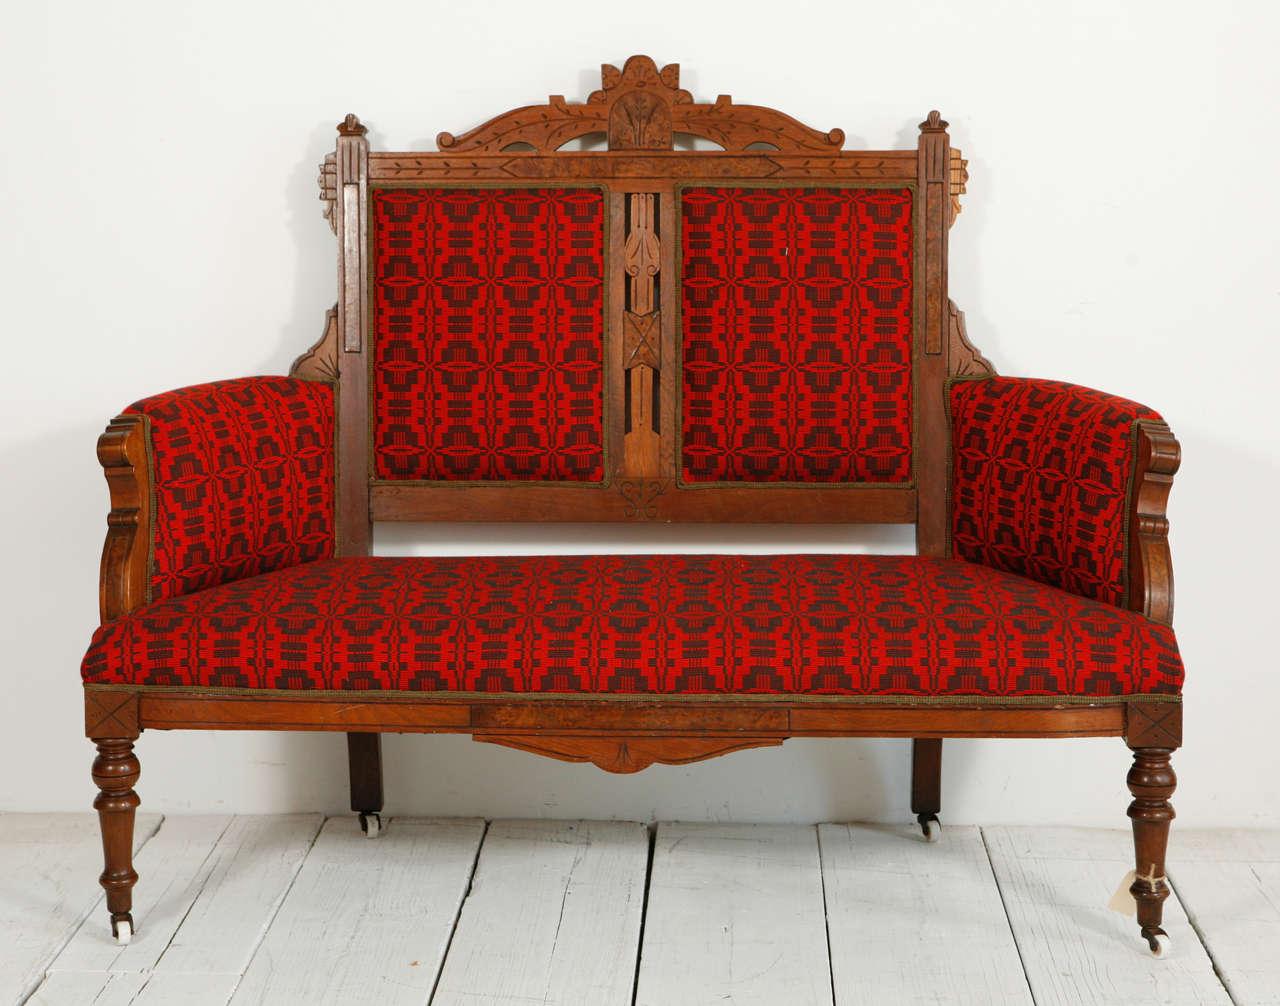 Edwardian-style wood frame newly reupholstered in a striking vintage geometric African cotton fabric.